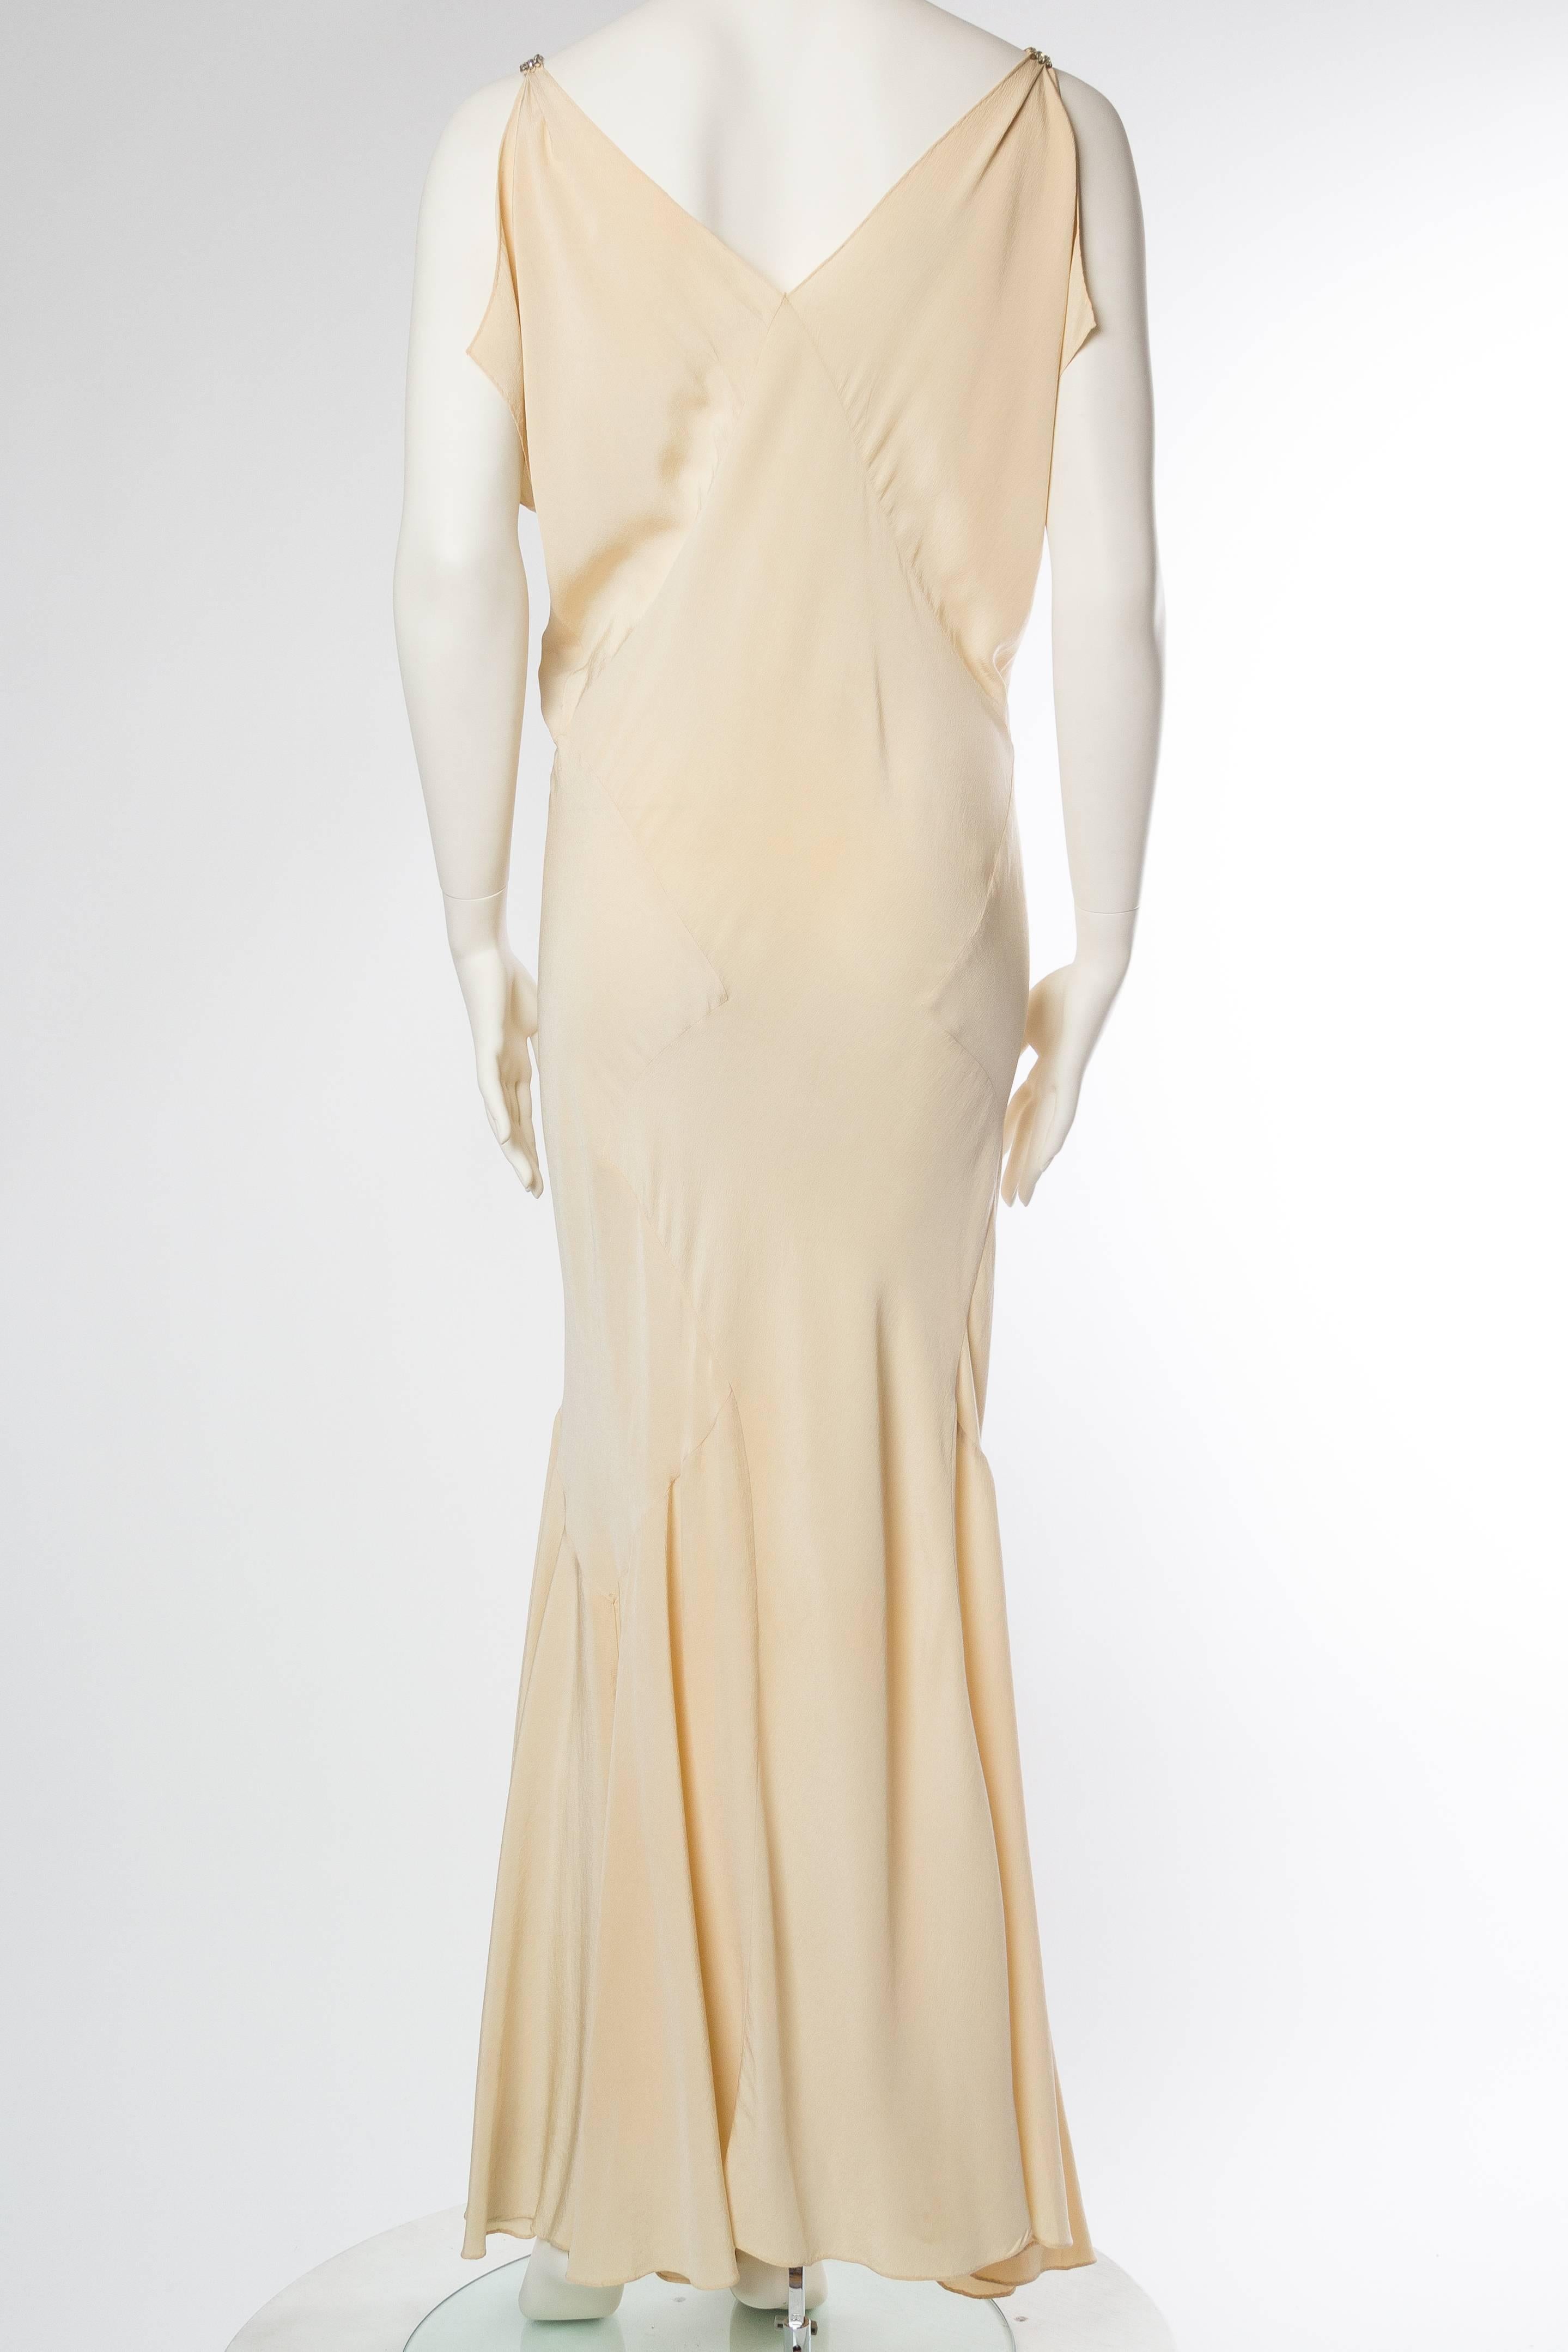 Women's 1930s Bias Silk Art Deco Gown with Crystals